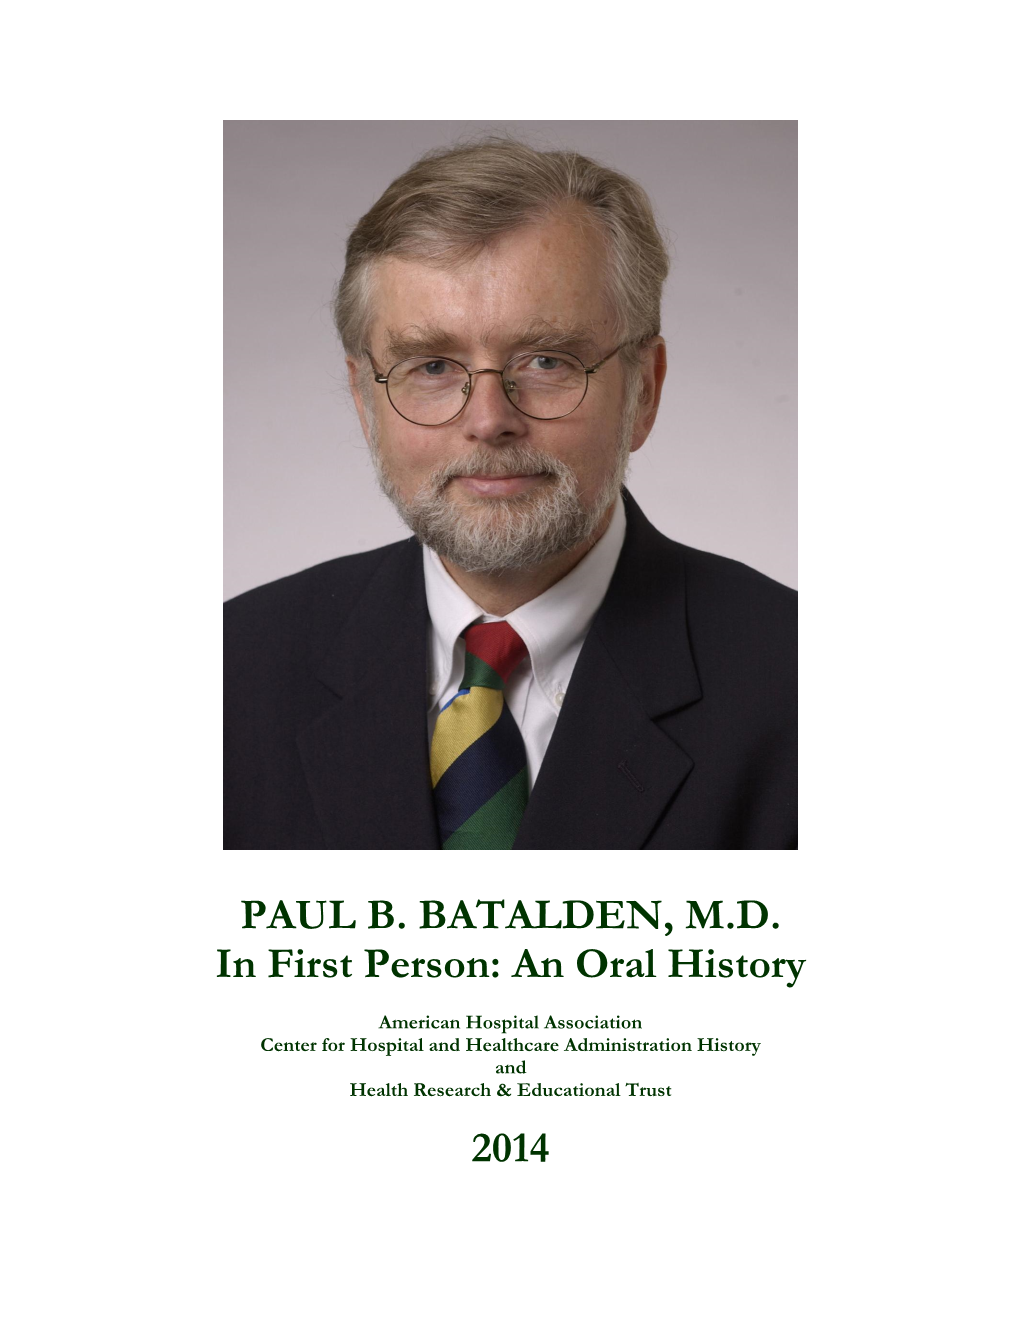 PAUL B. BATALDEN, M.D. in First Person: an Oral History 2014